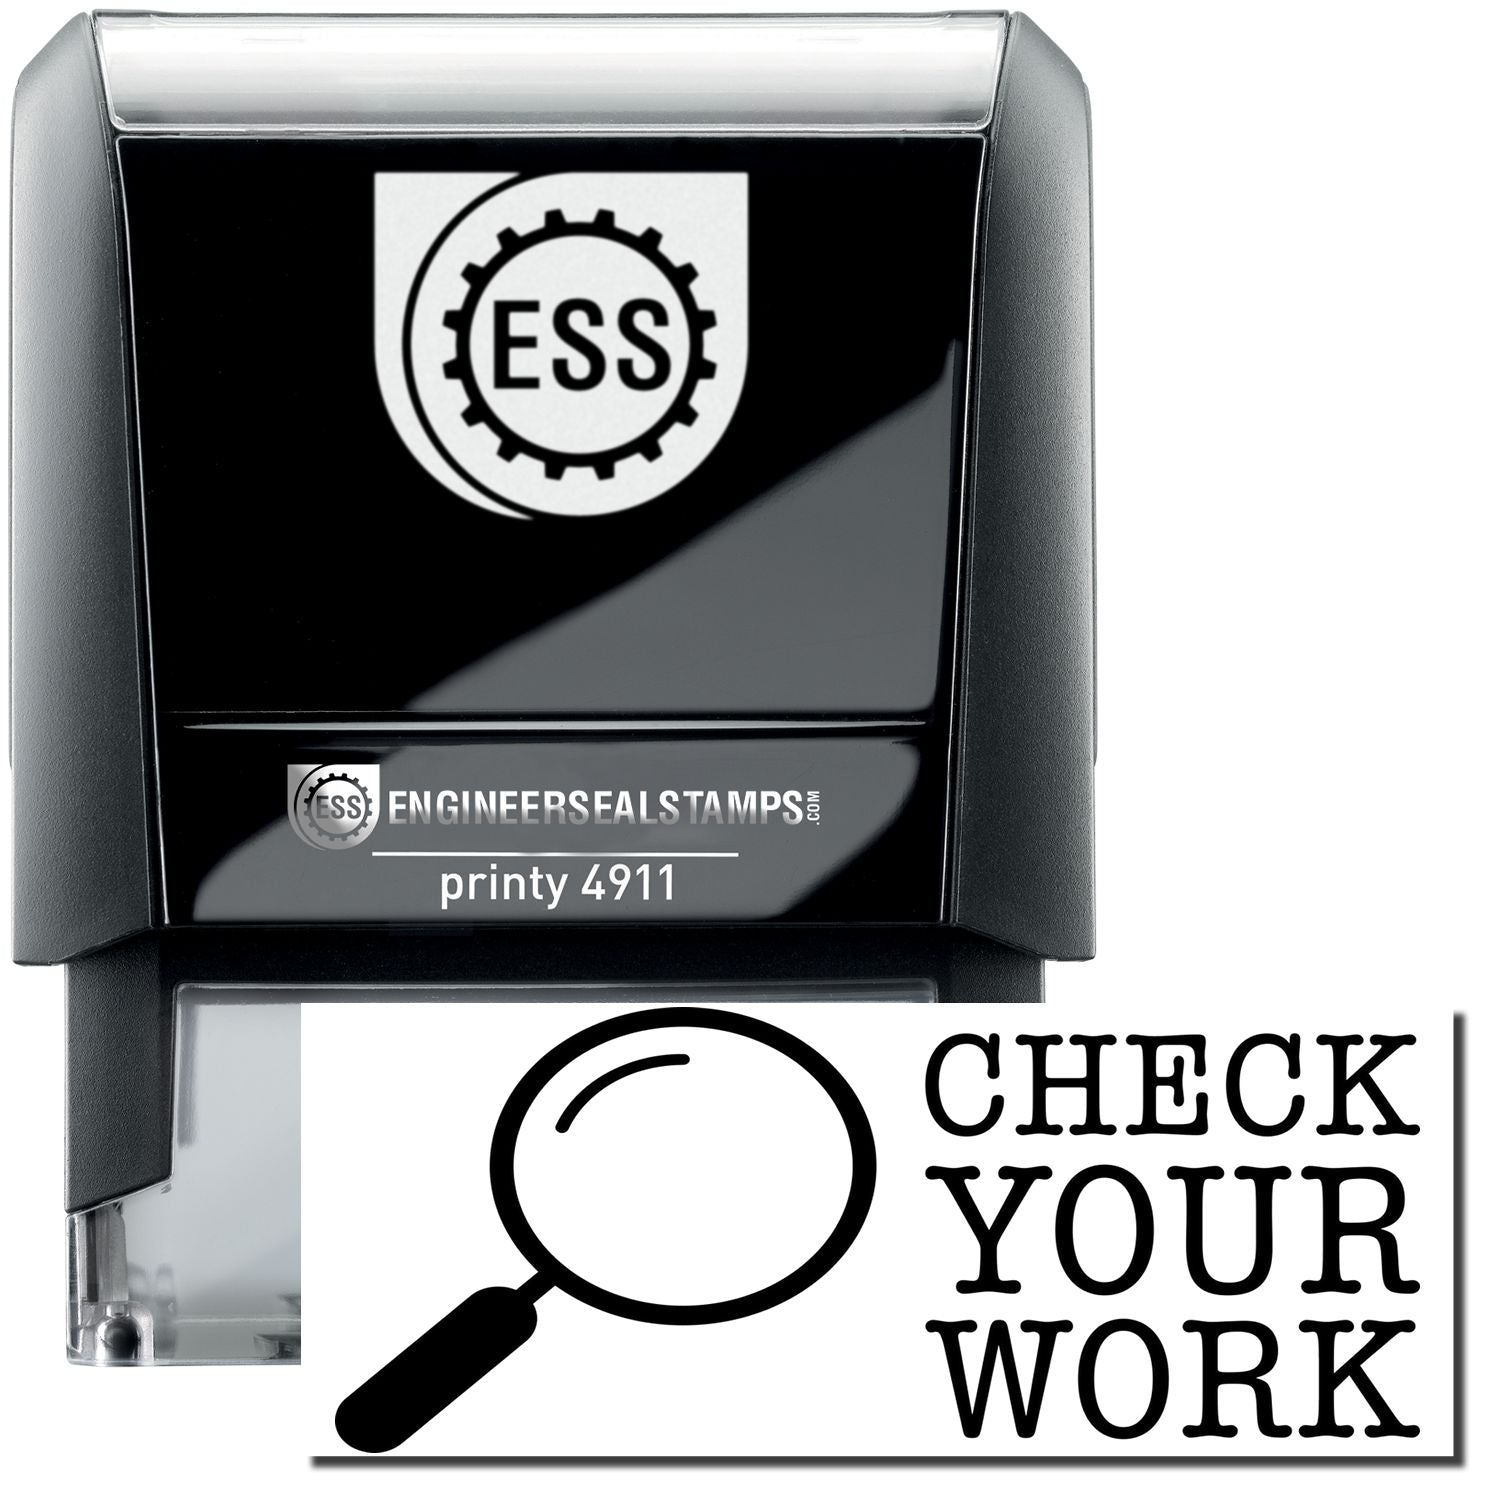 A self-inking stamp with a stamped image showing how the text "CHECK YOUR WORK" (with an image of a magnifying glass on the left side) is displayed after stamping.